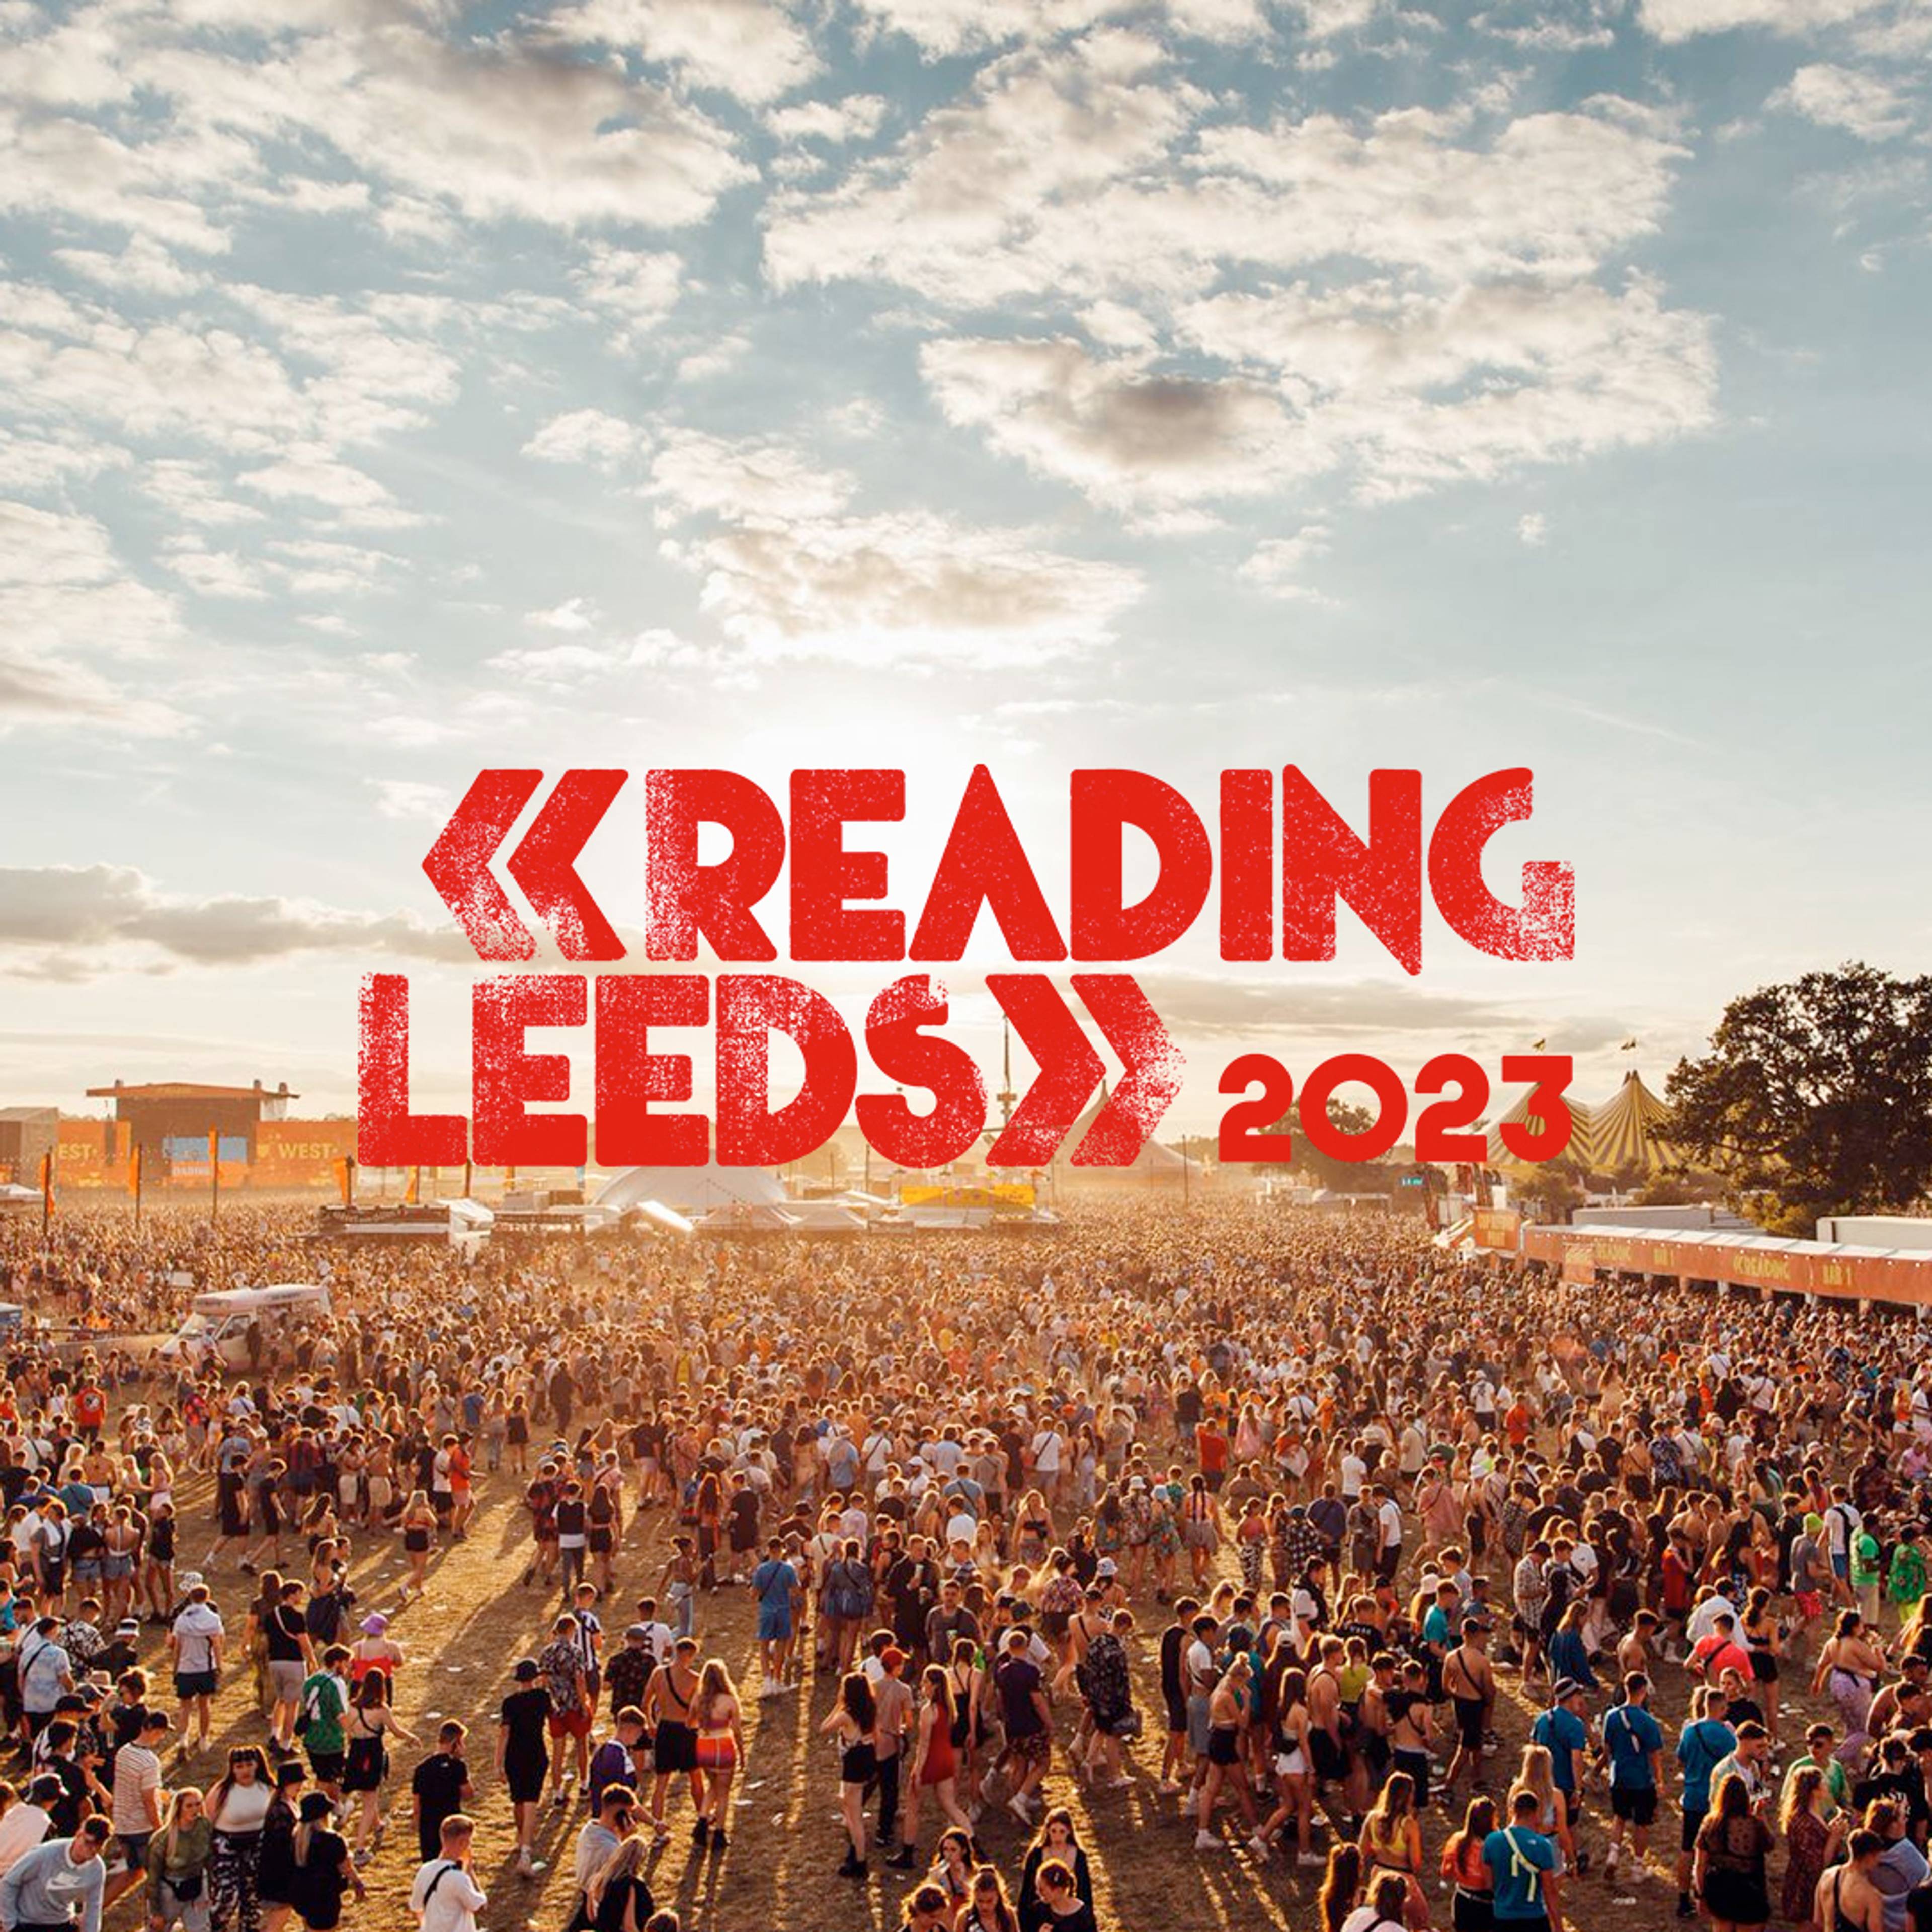 Festival crowd in the day behind the Reading and Leeds 2023 logo